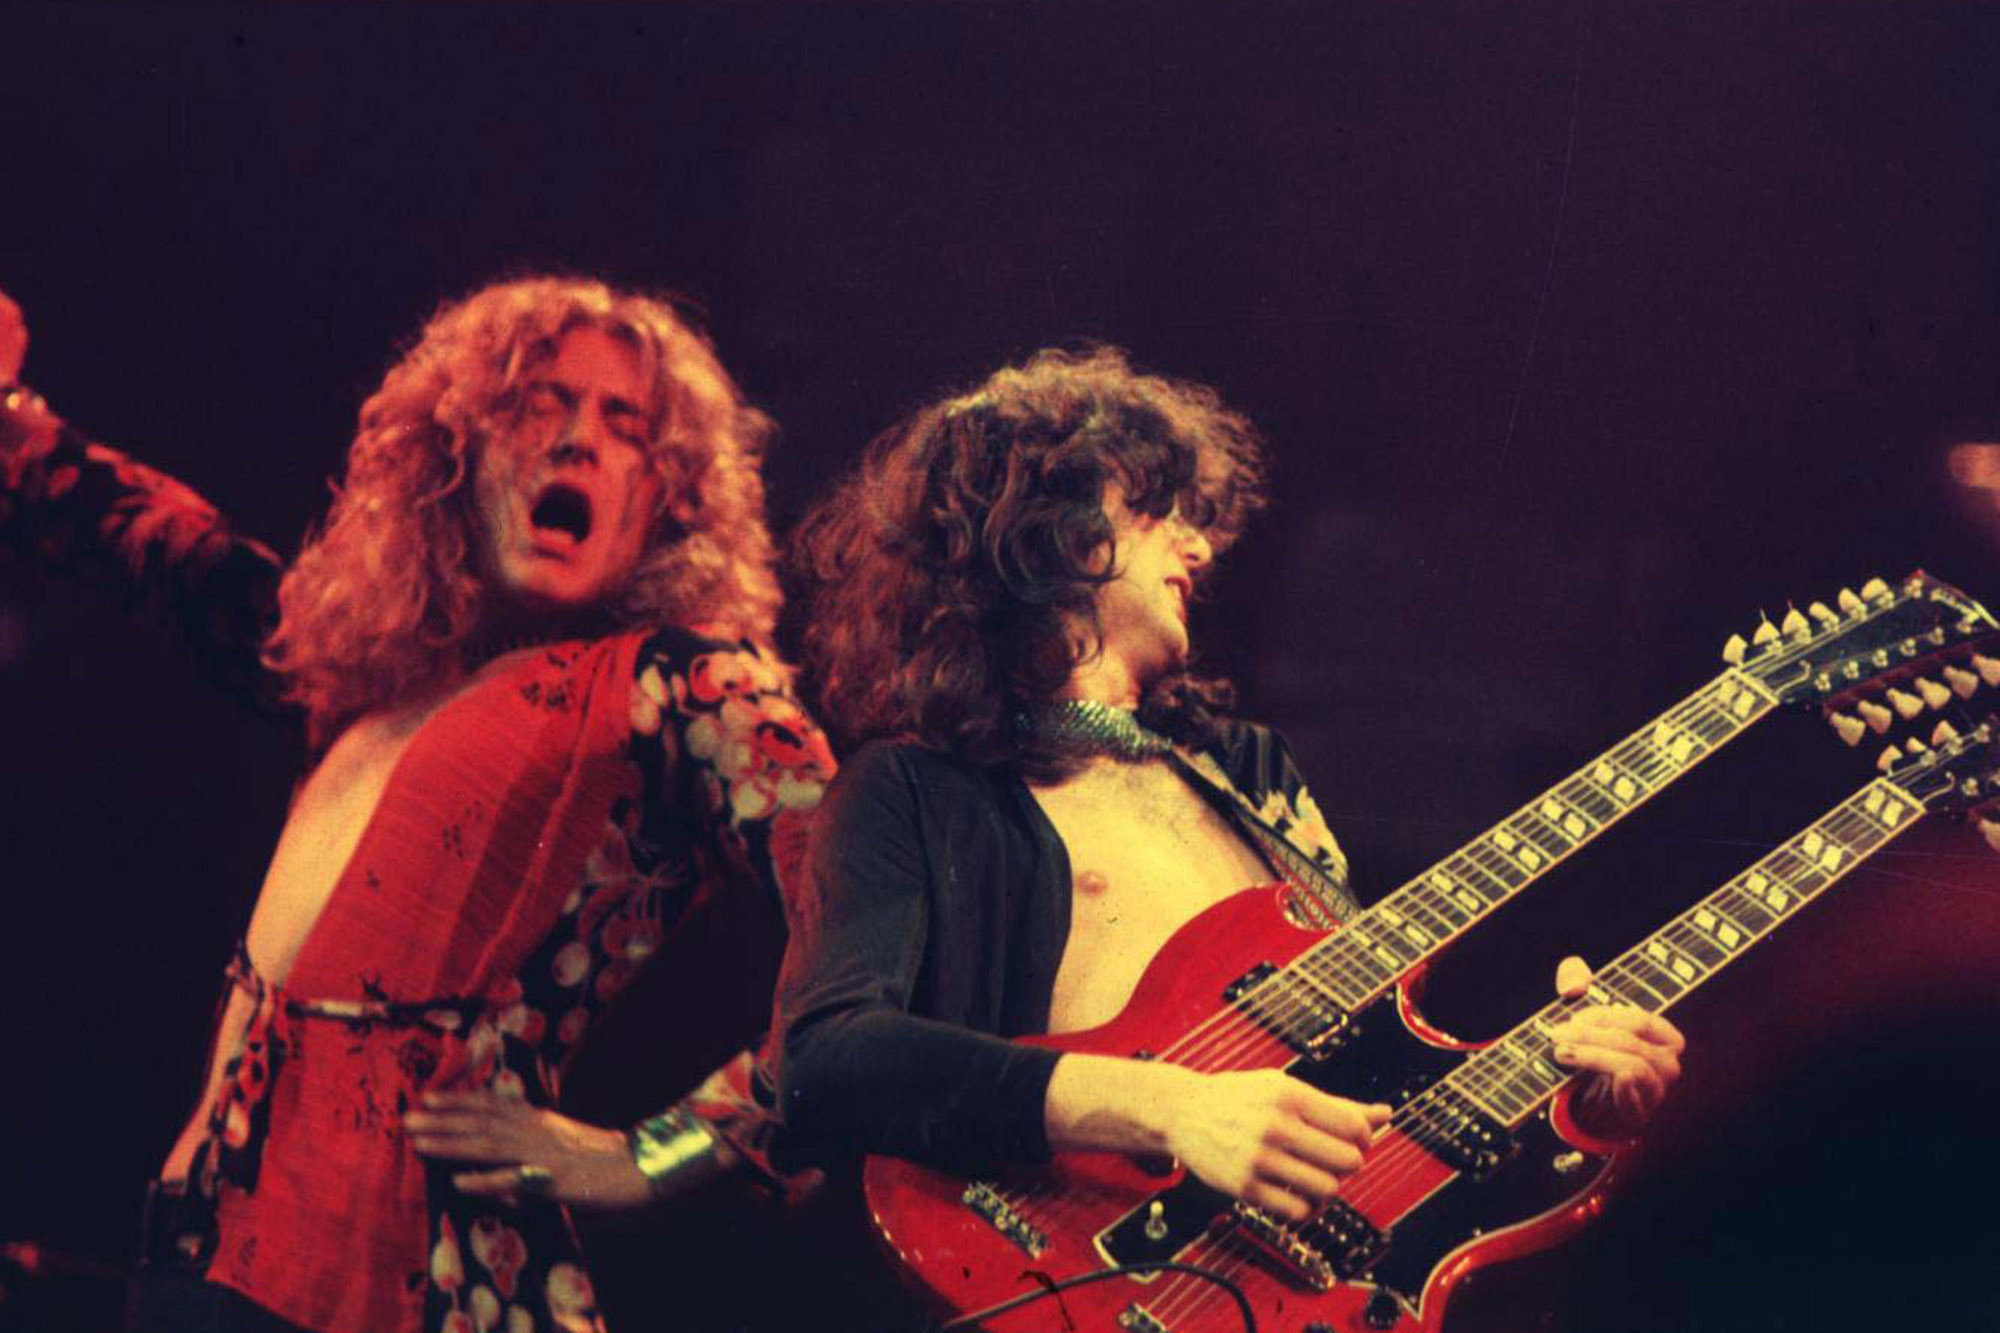 2000x1333 robert plant and jimmy page live wallpaper Â· led zeppelin live wallpaper